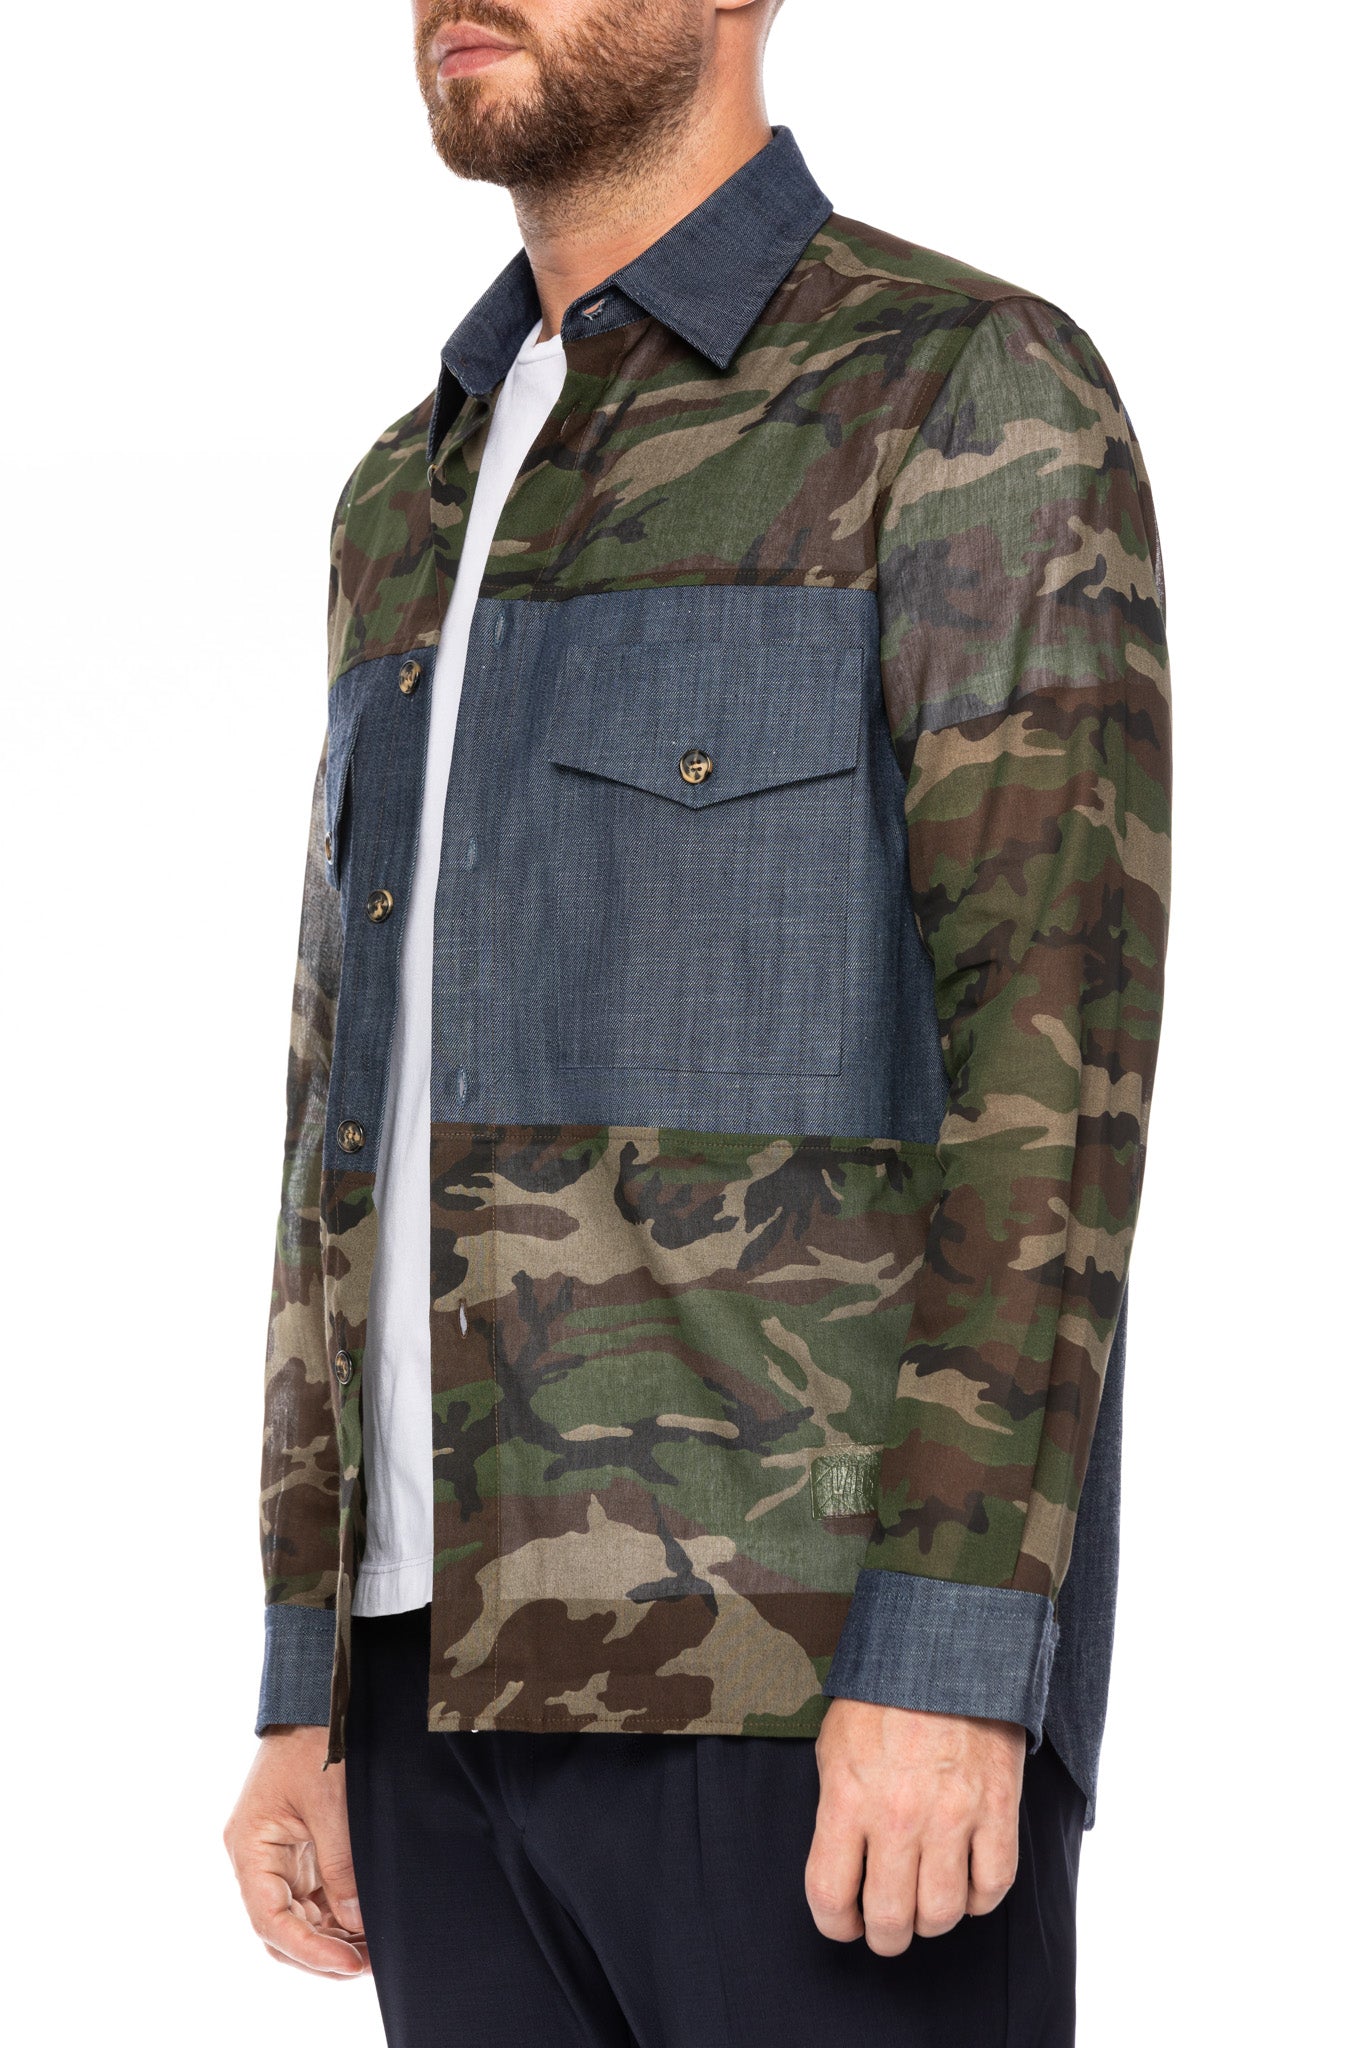 Army shirt with denim inserts